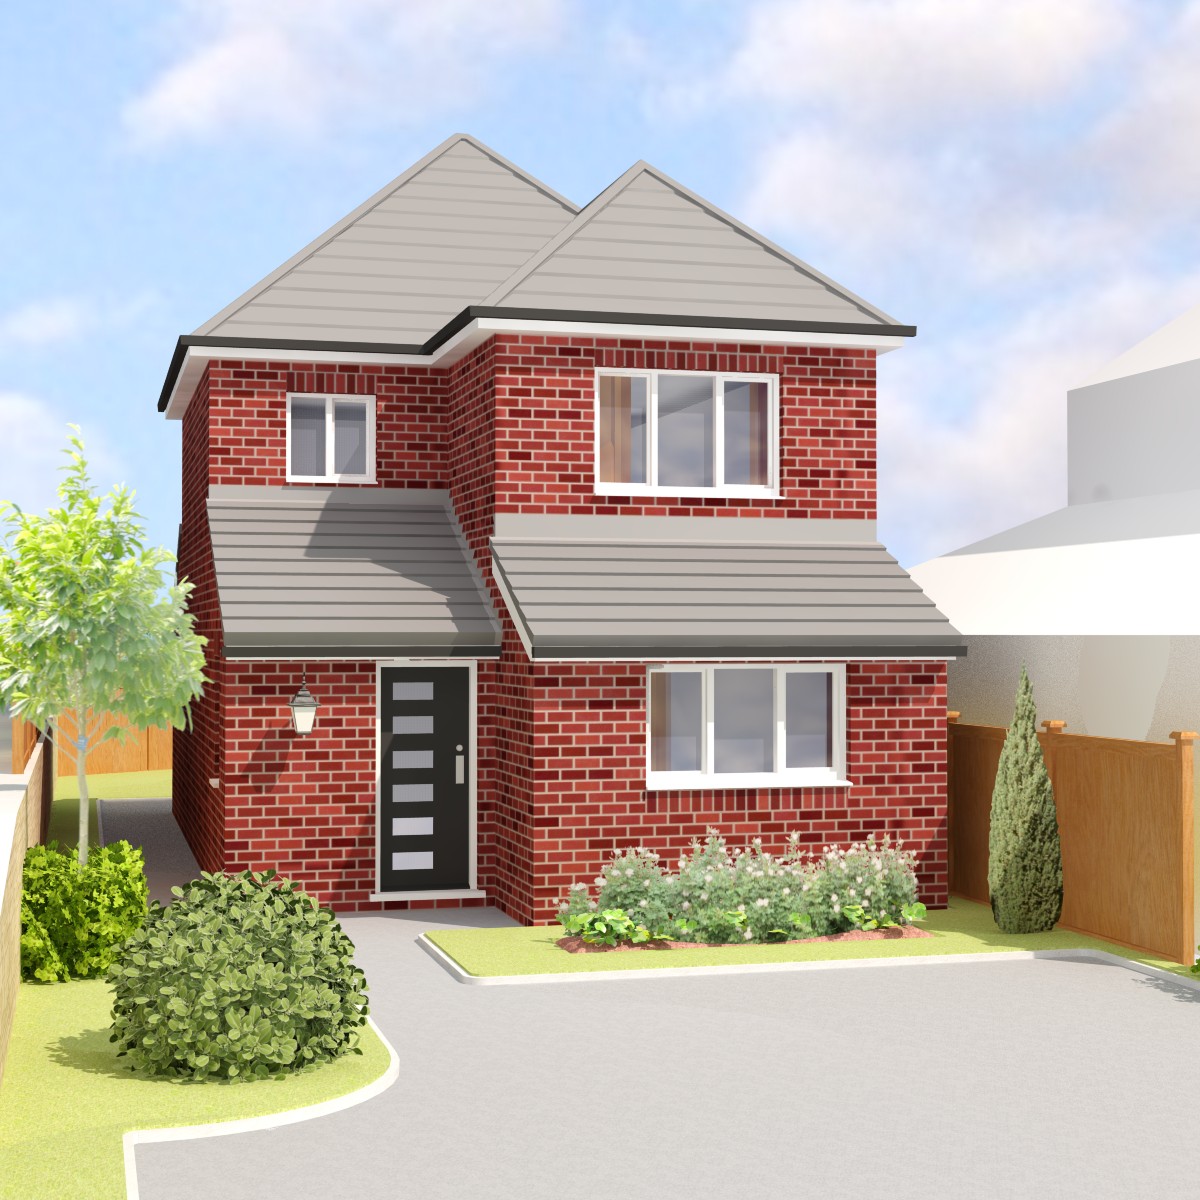 Artist impression of a house. Architectural visual. illustration of a house artist impression